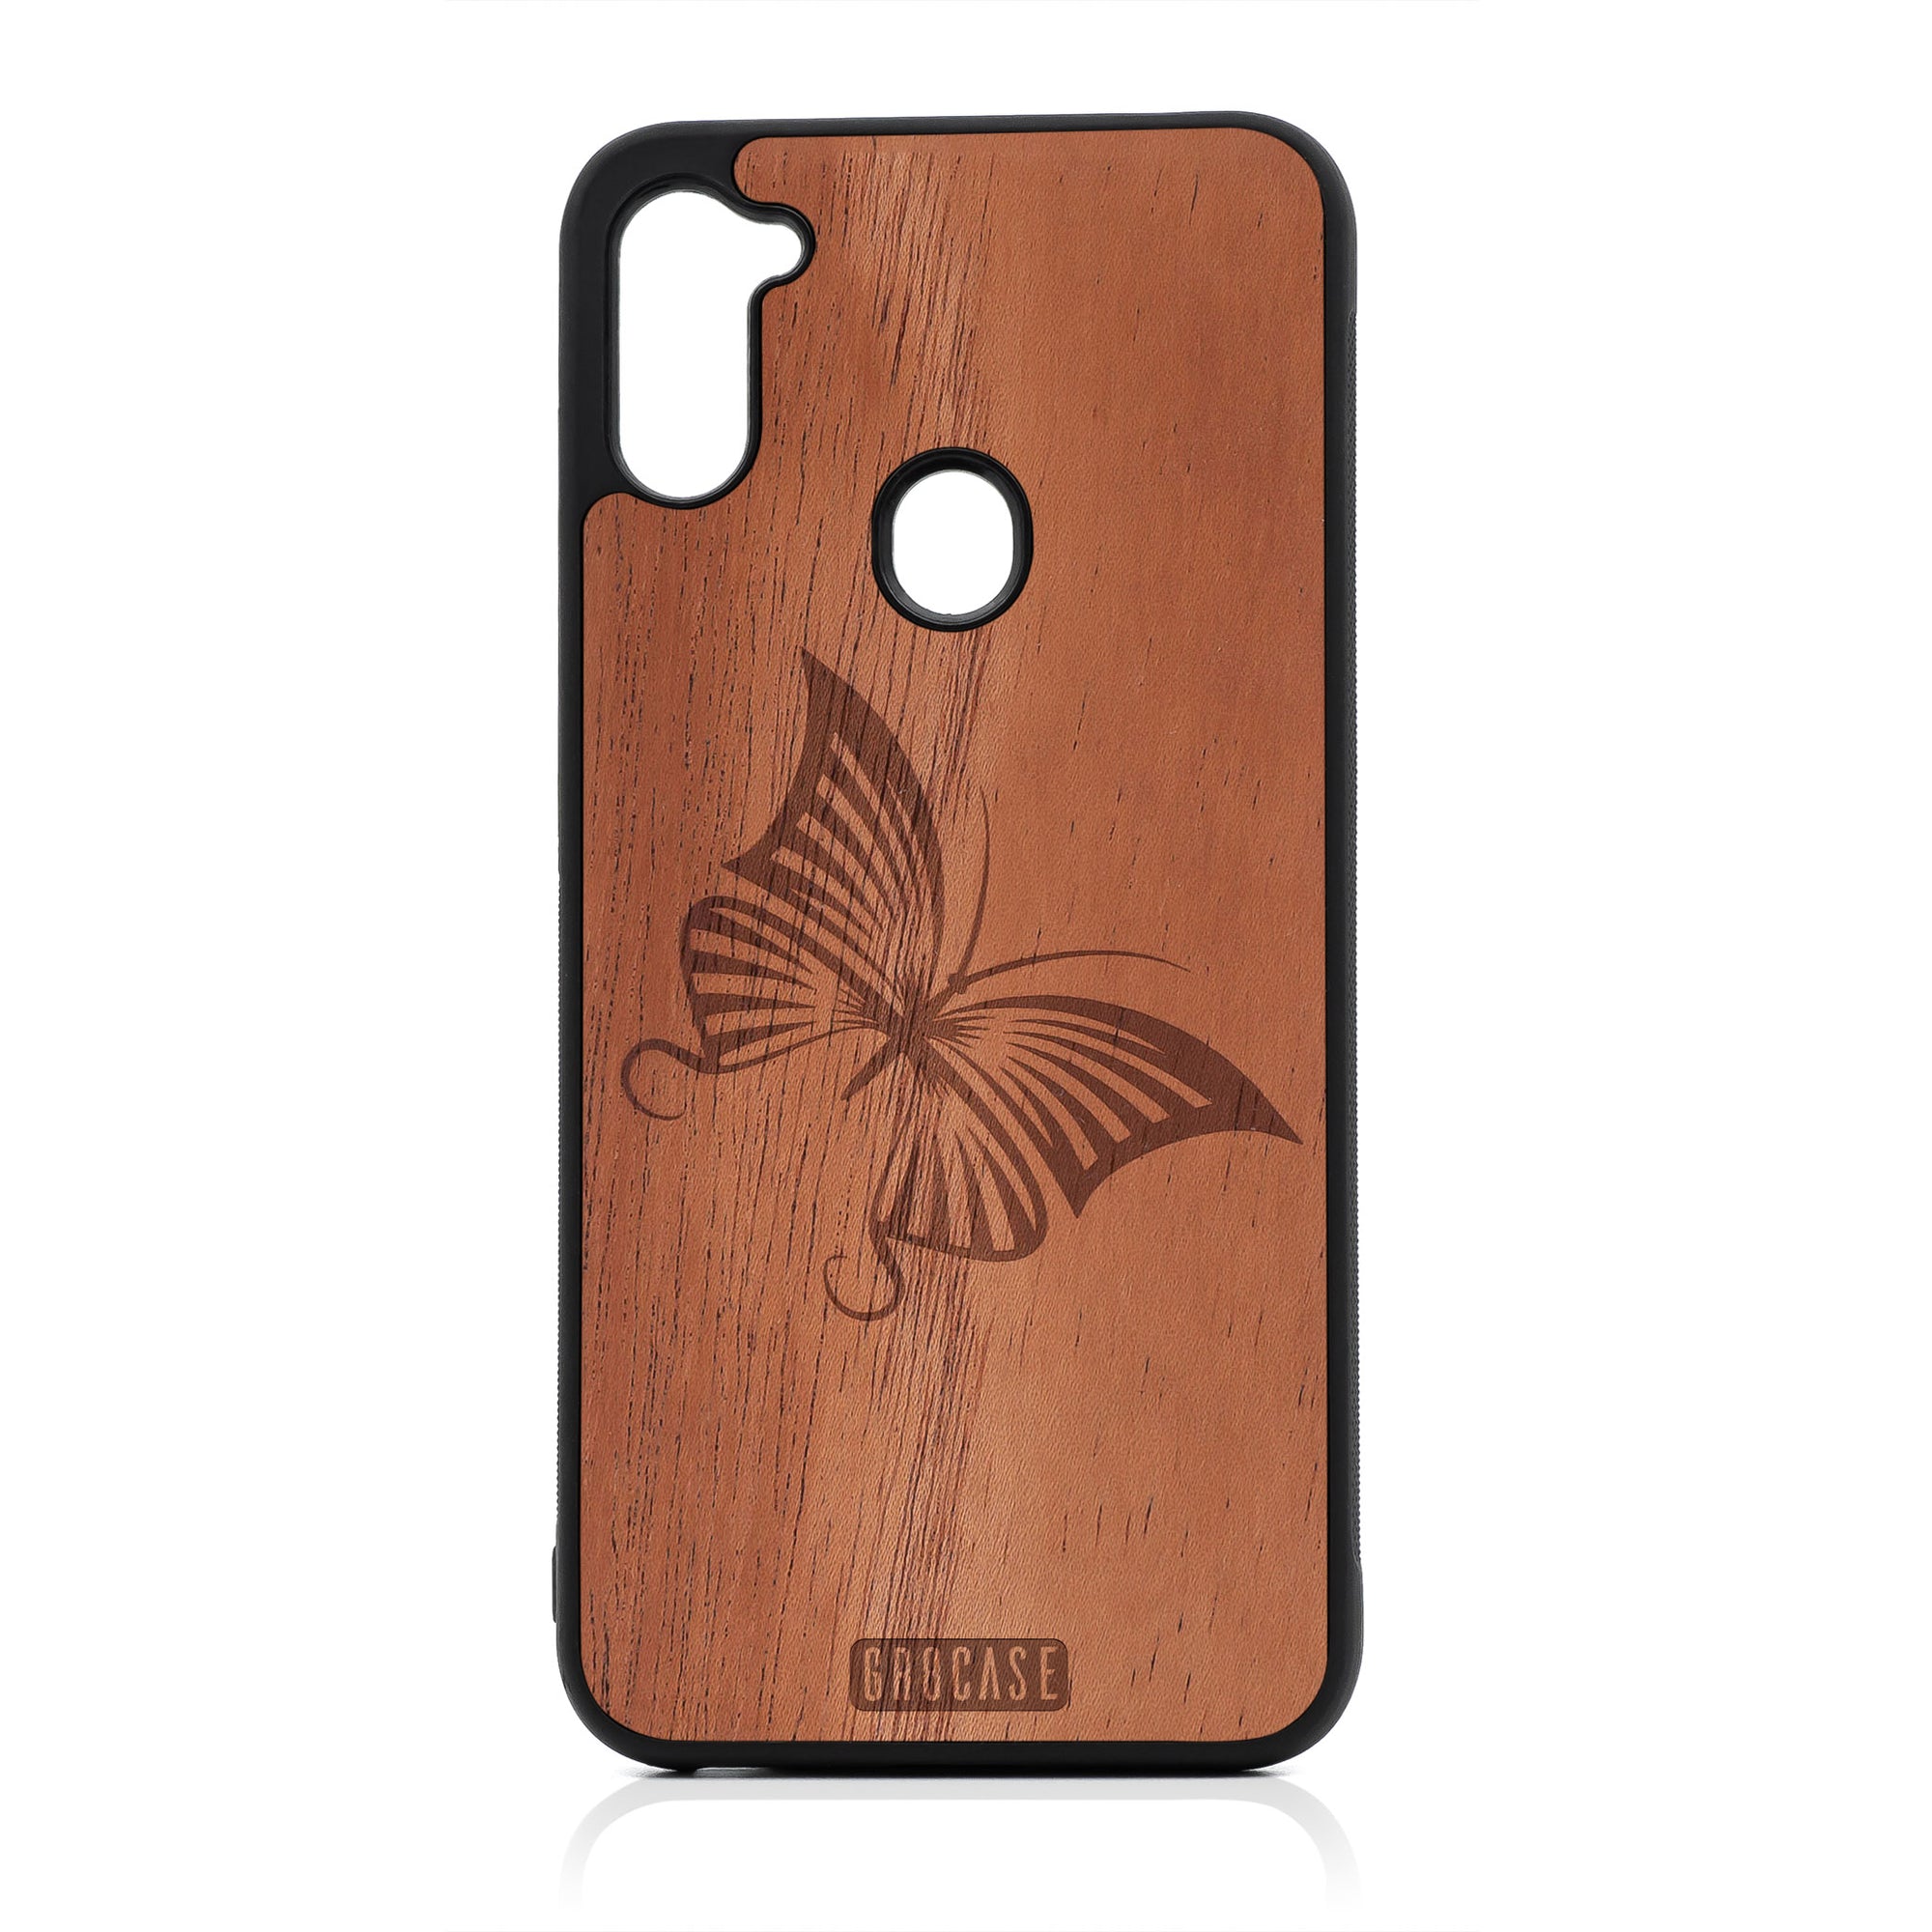 Butterfly Design Wood Case For Samsung Galaxy A11